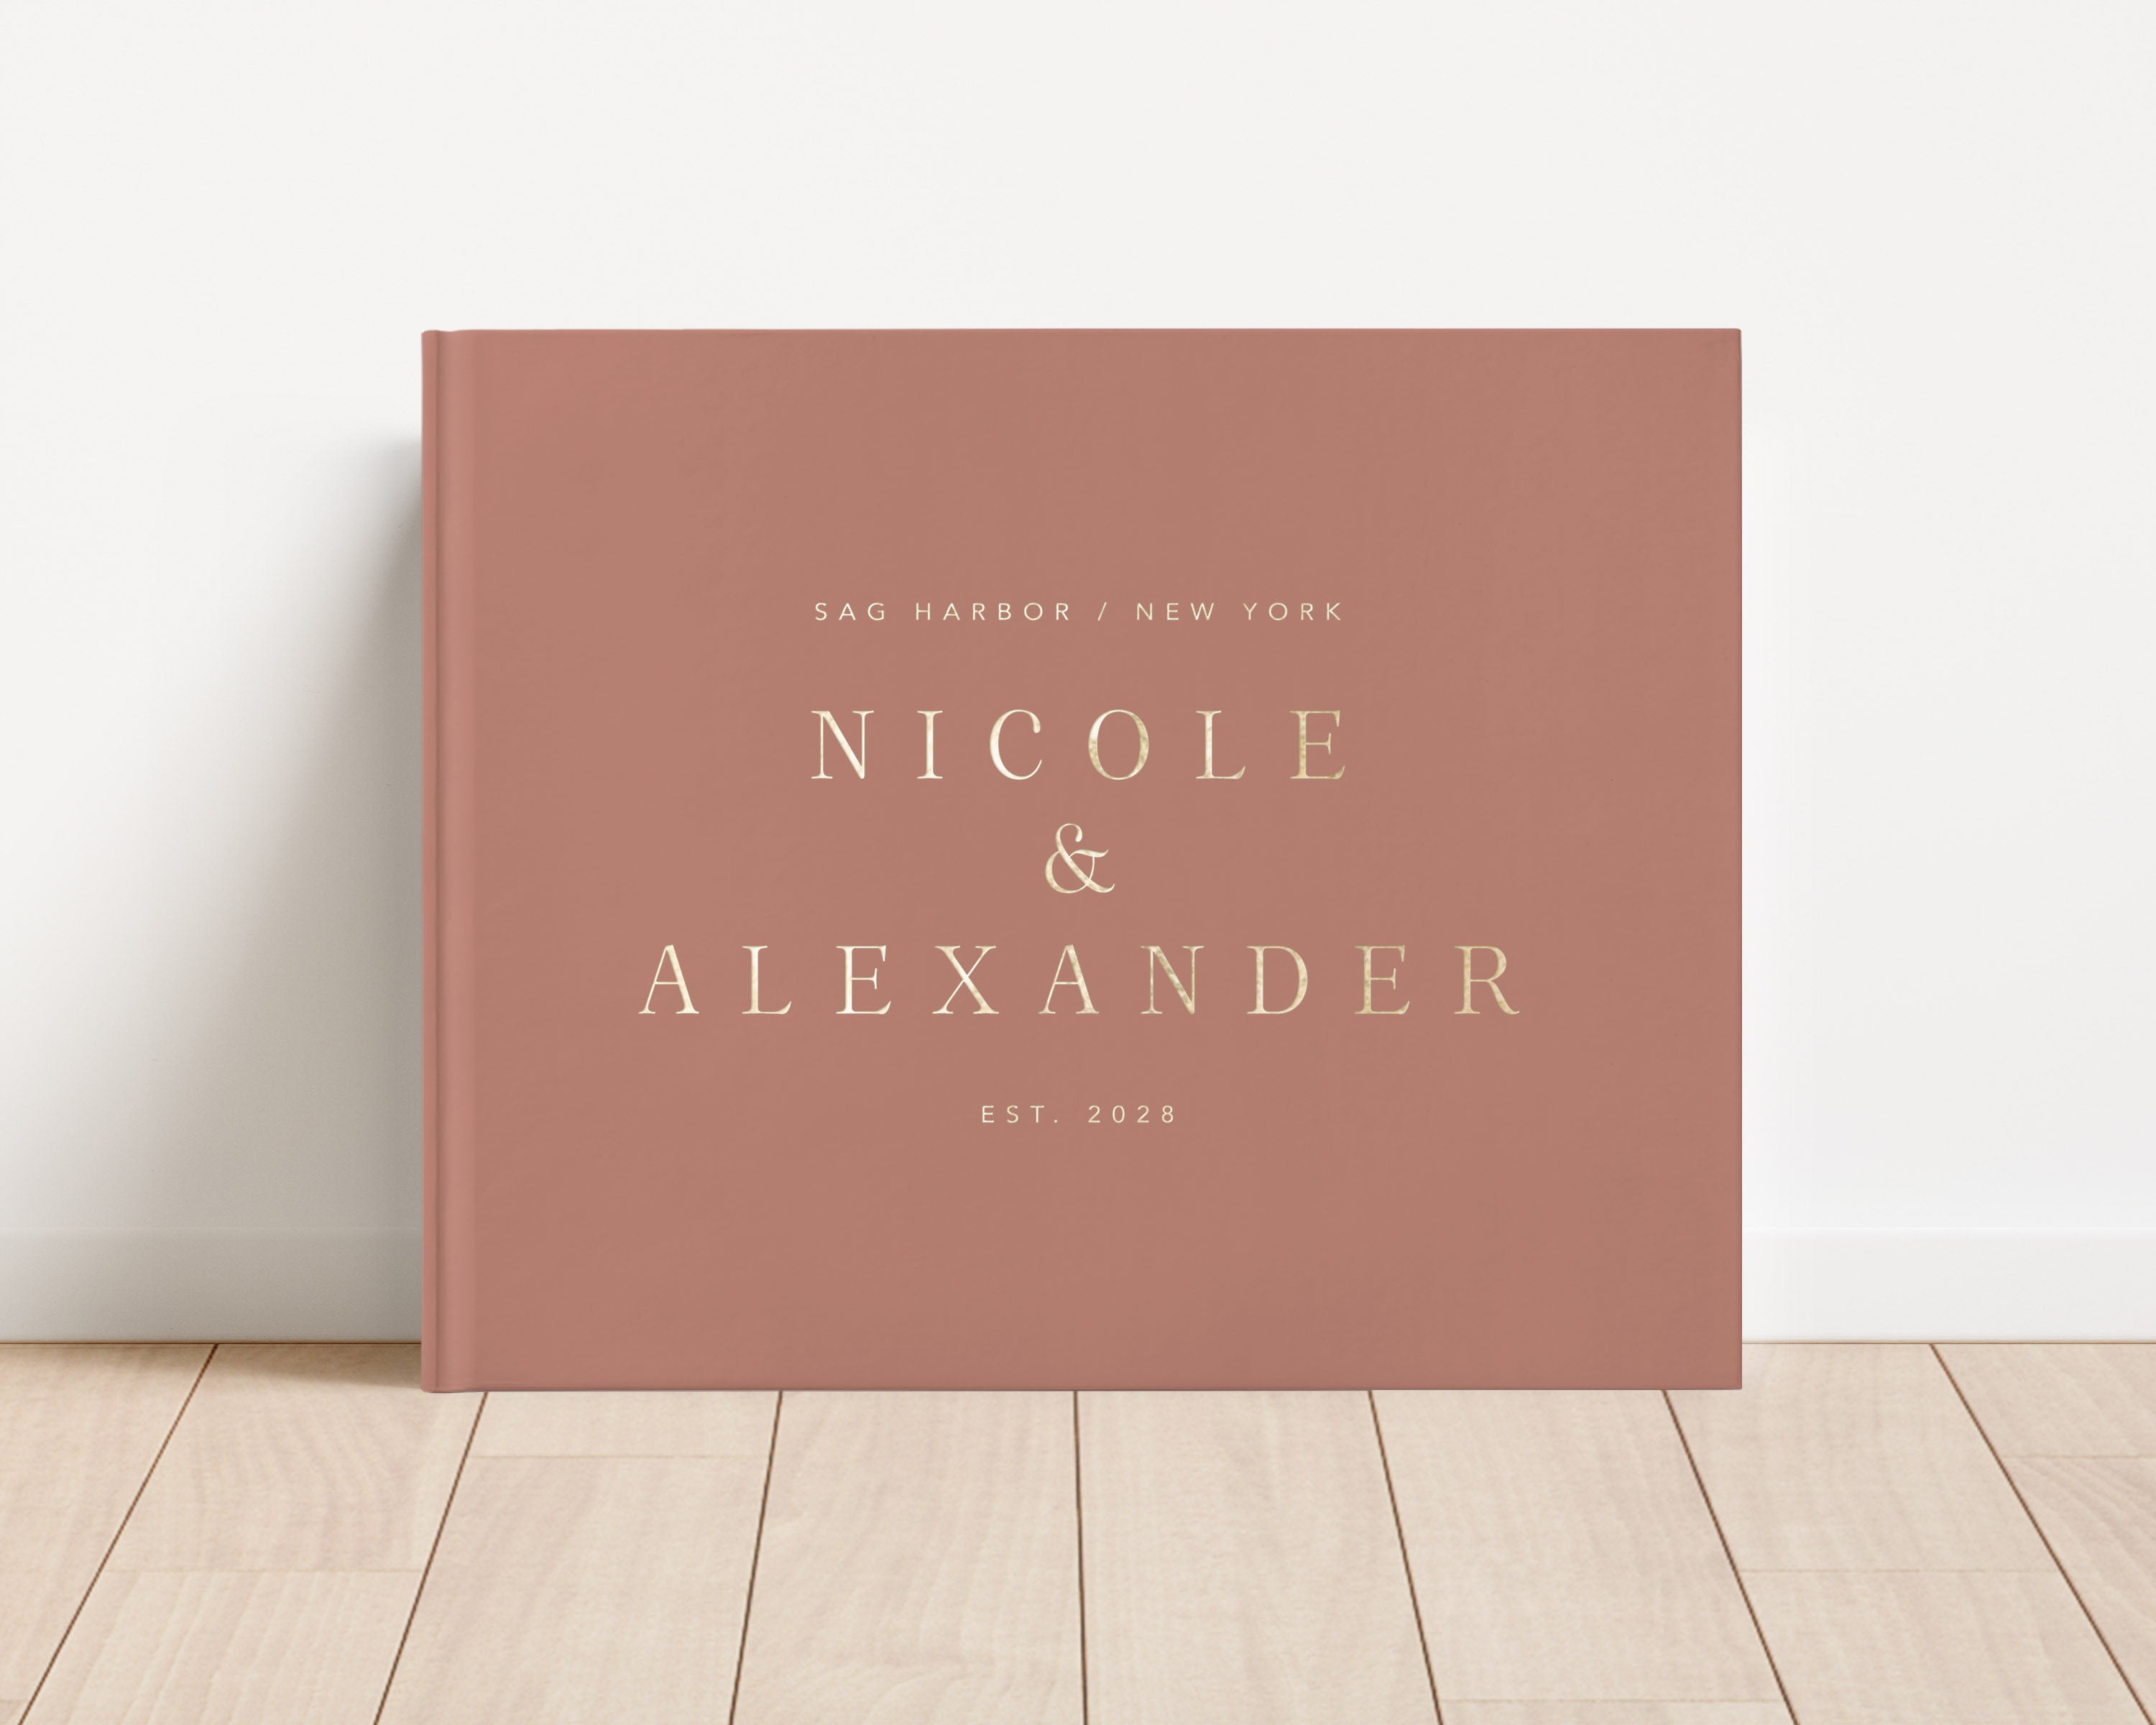 Luxury wedding guest book with custom gold foil text and clay hardback cover.